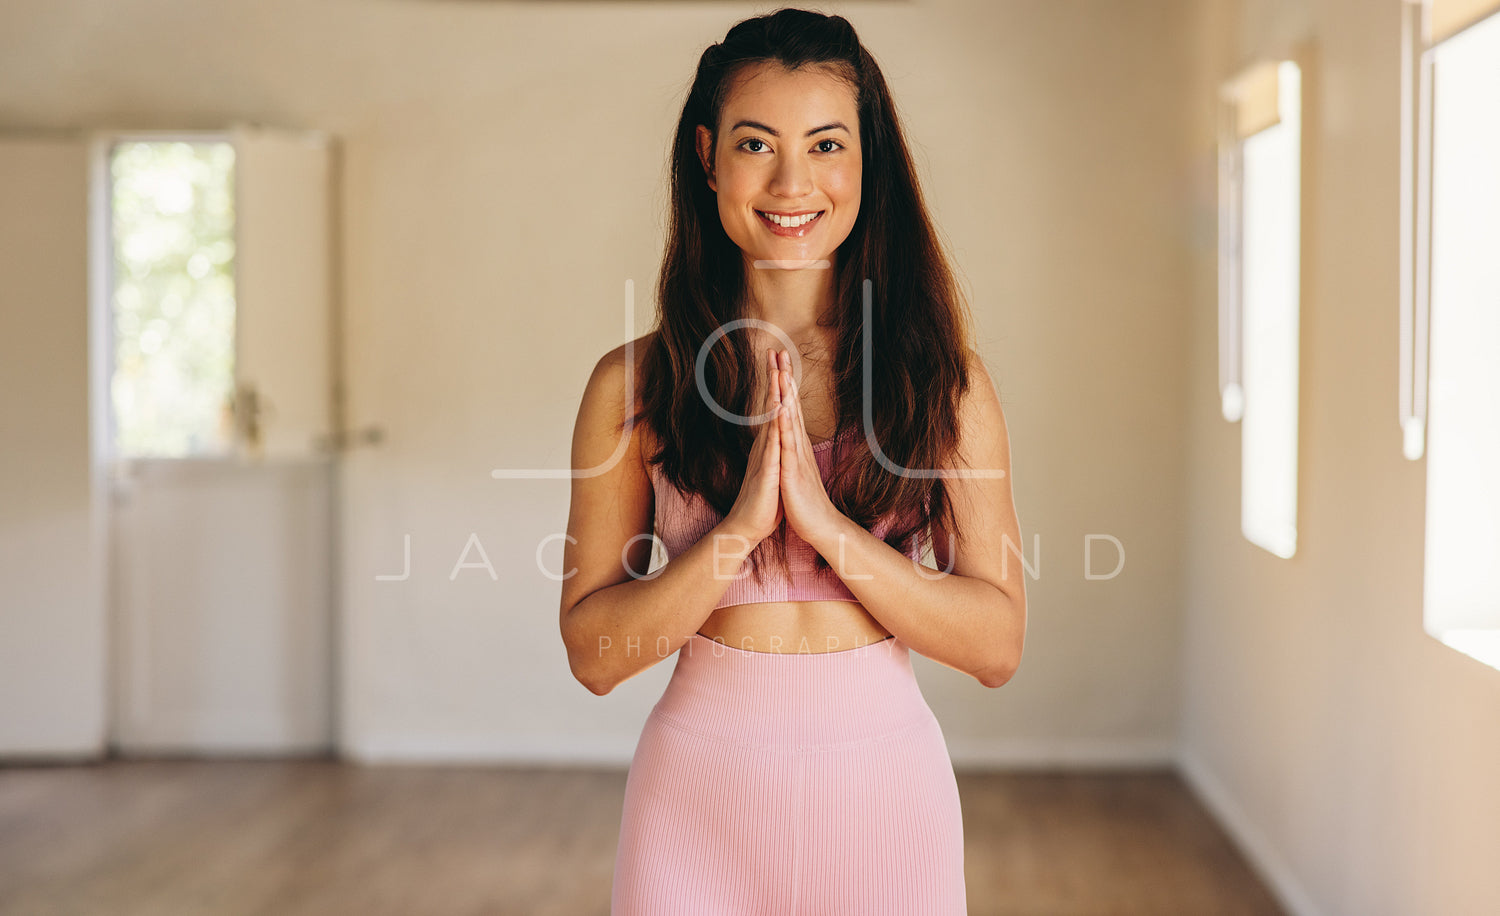 Female yoga instructor standing in a fitness studio